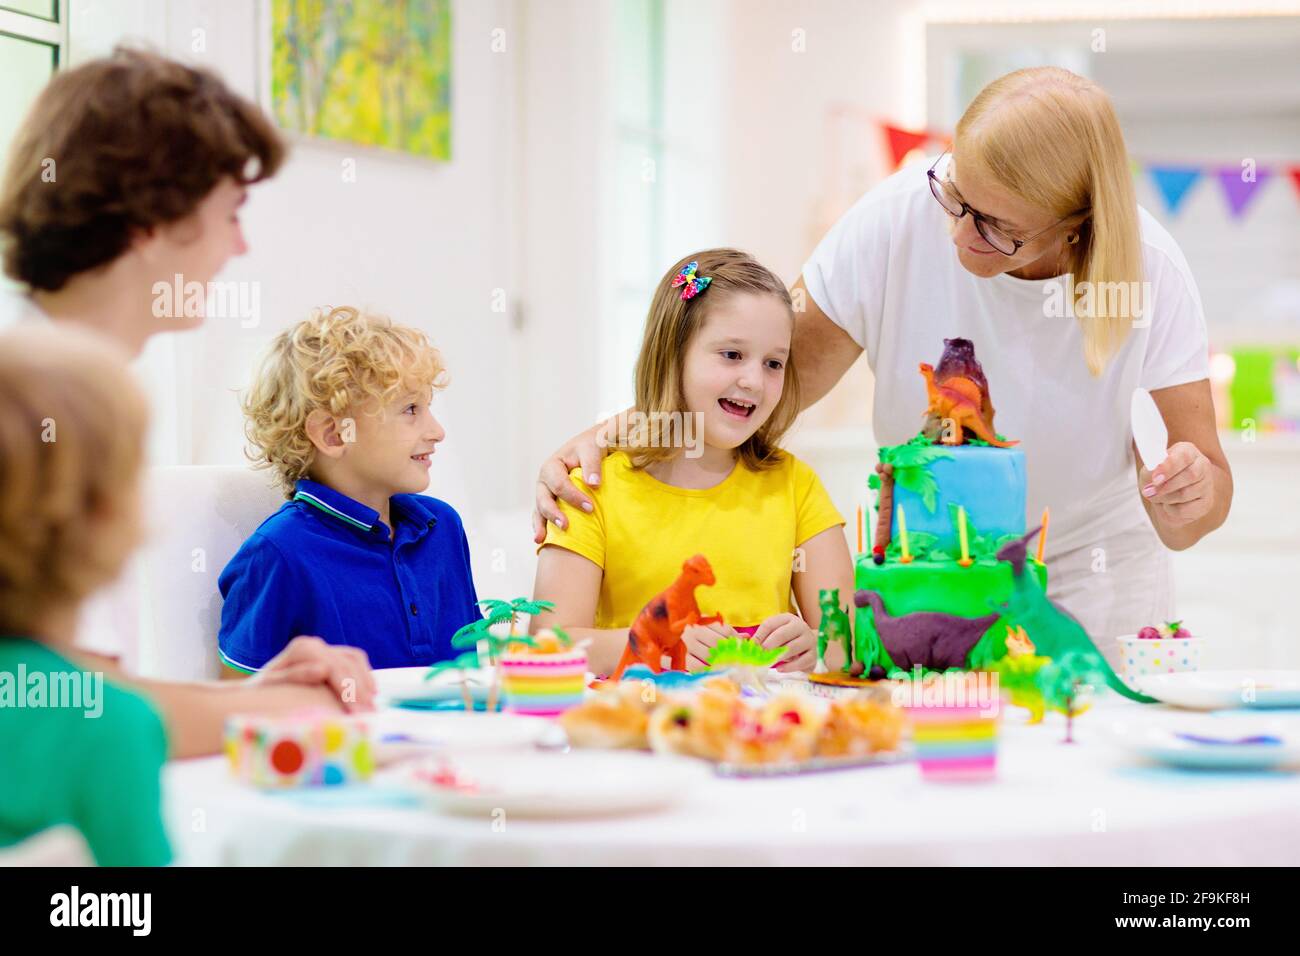 Kids birthday party. Dinosaur theme cake. Little girl blowing candles and opening gifts. Children event. Decoration for dino themed celebration. Stock Photo